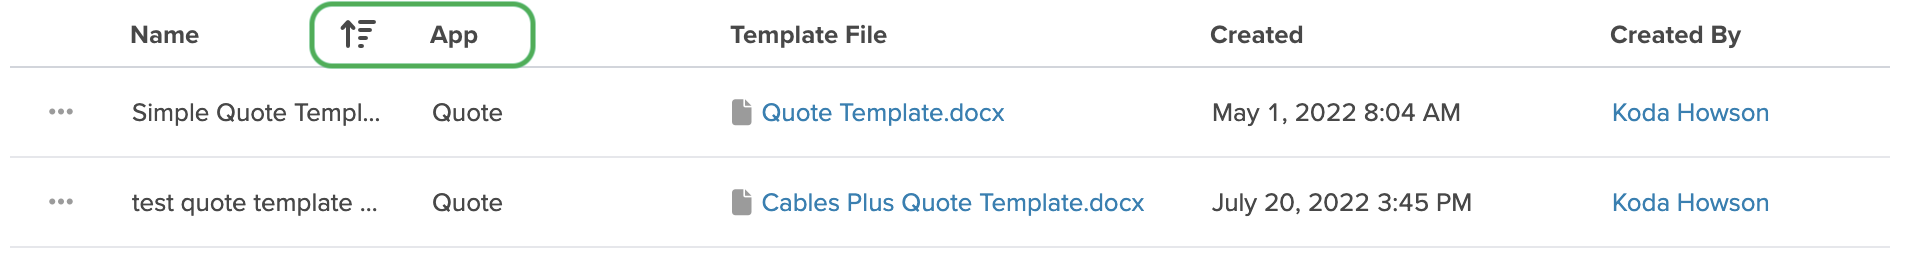 document_template_filter_1.png